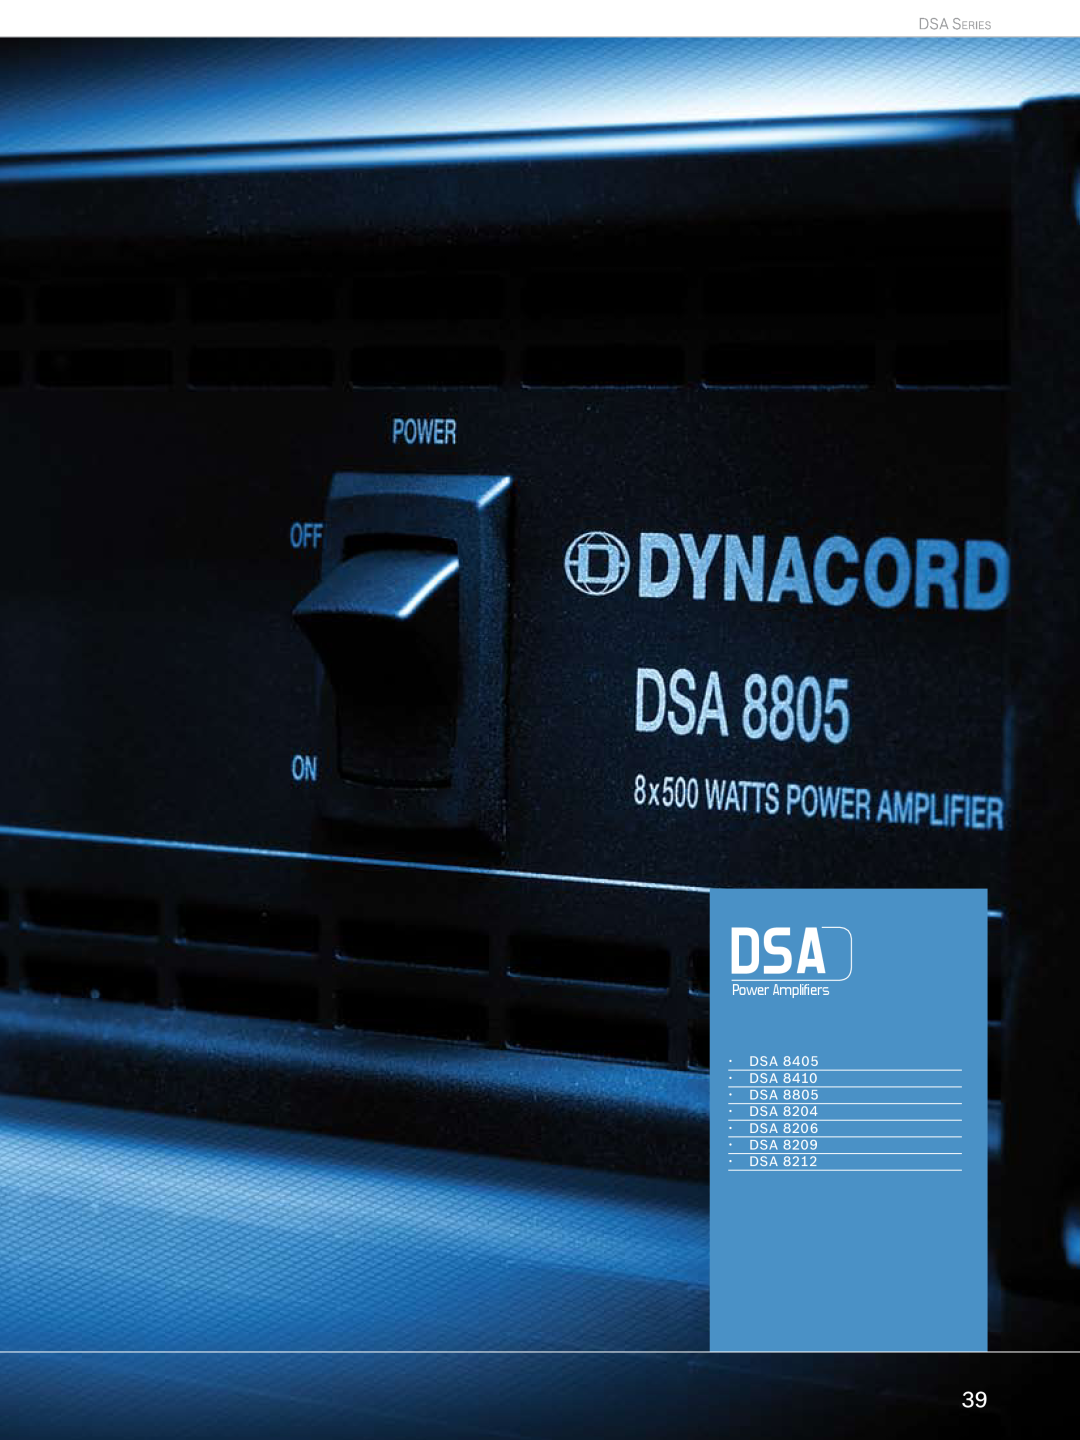 Dynacord Professional Power Amplifiers manual DSA Series, ··Dsa ··Dsa ··Dsa ··Dsa ··Dsa ··Dsa ··Dsa 